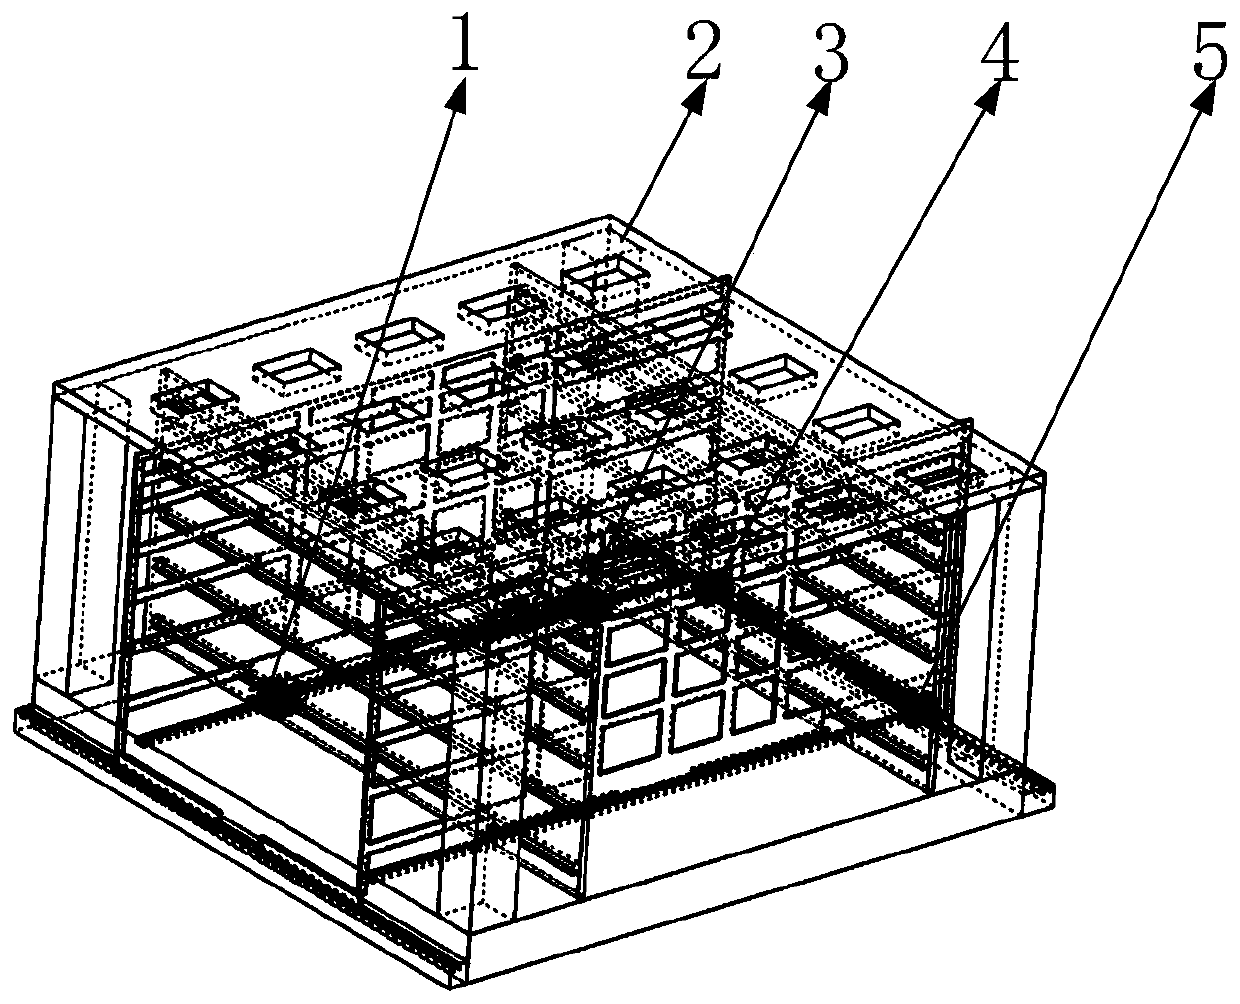 A humanized pet cage that automatically adjusts the size according to the animal's activity